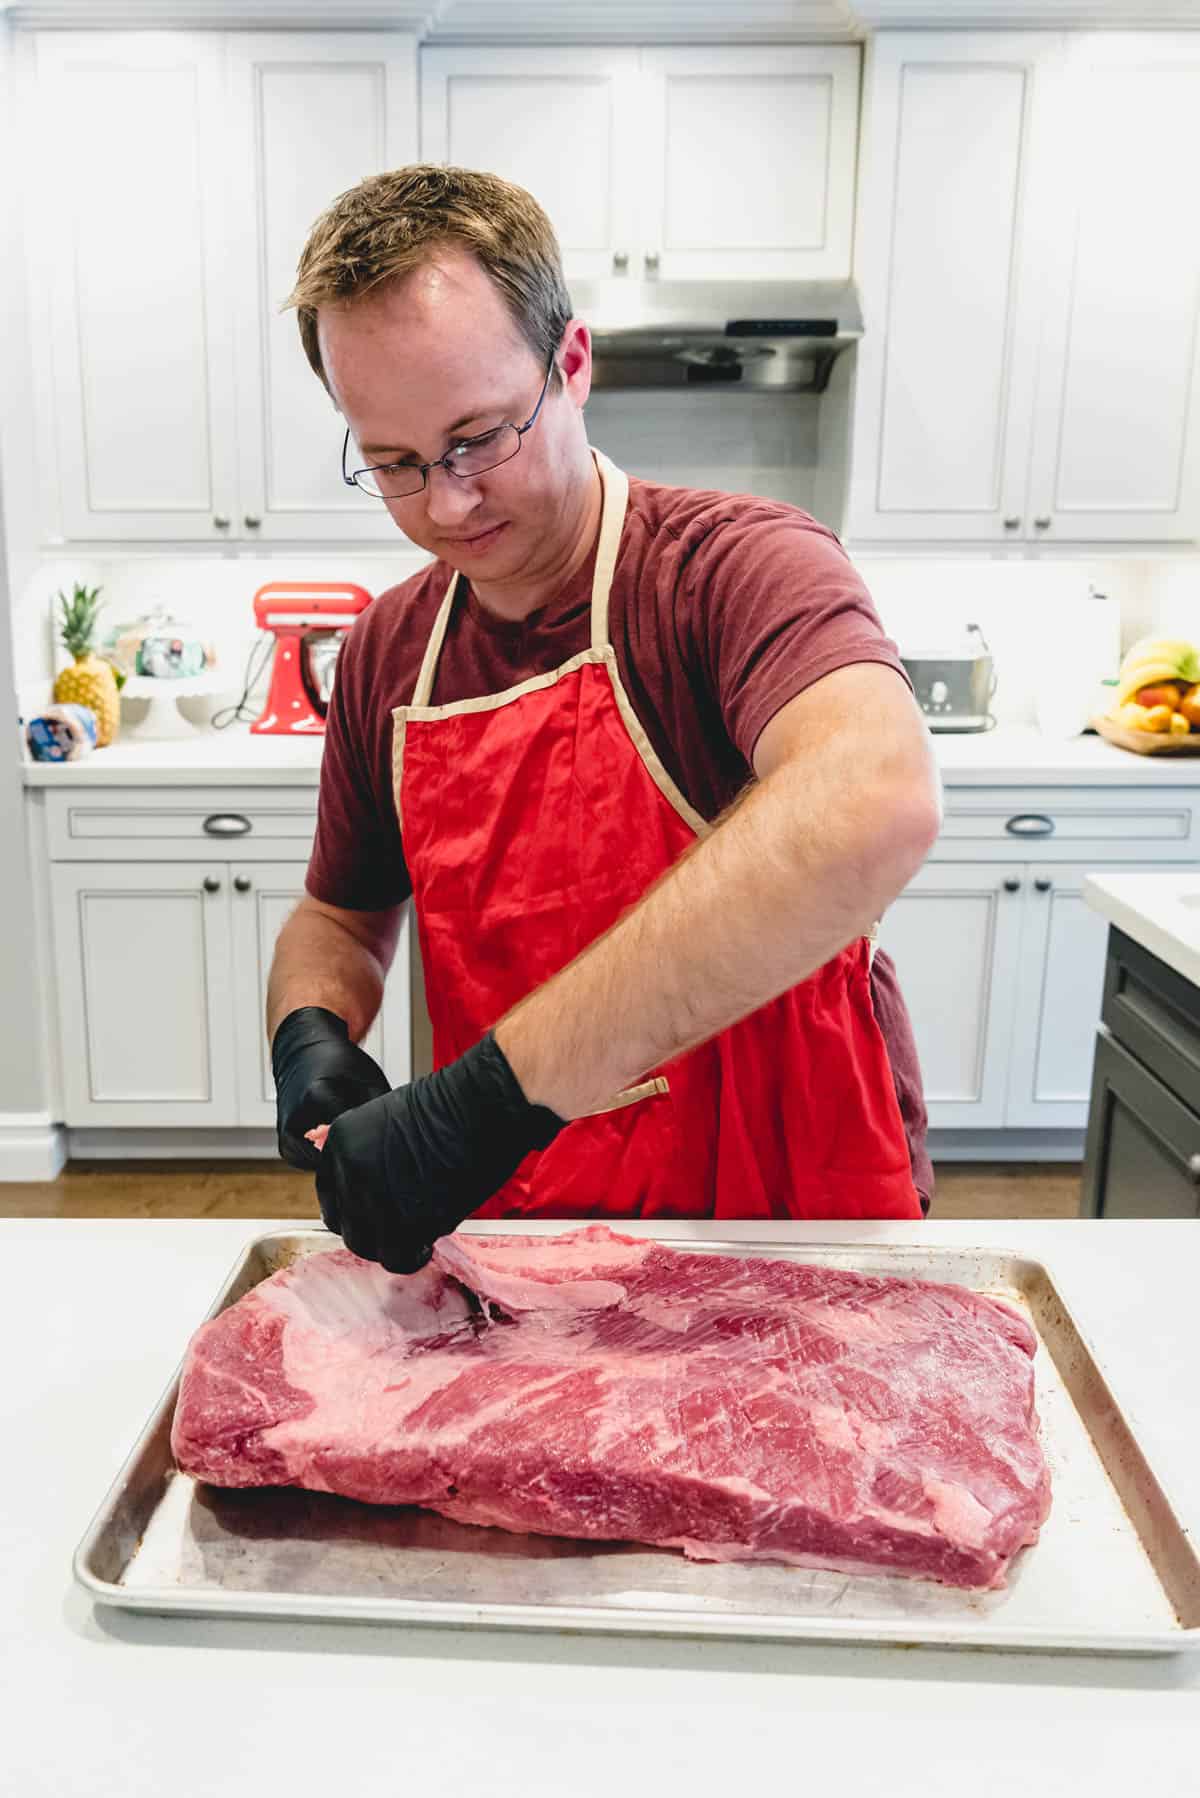 An image of a man trimming a beef brisket.